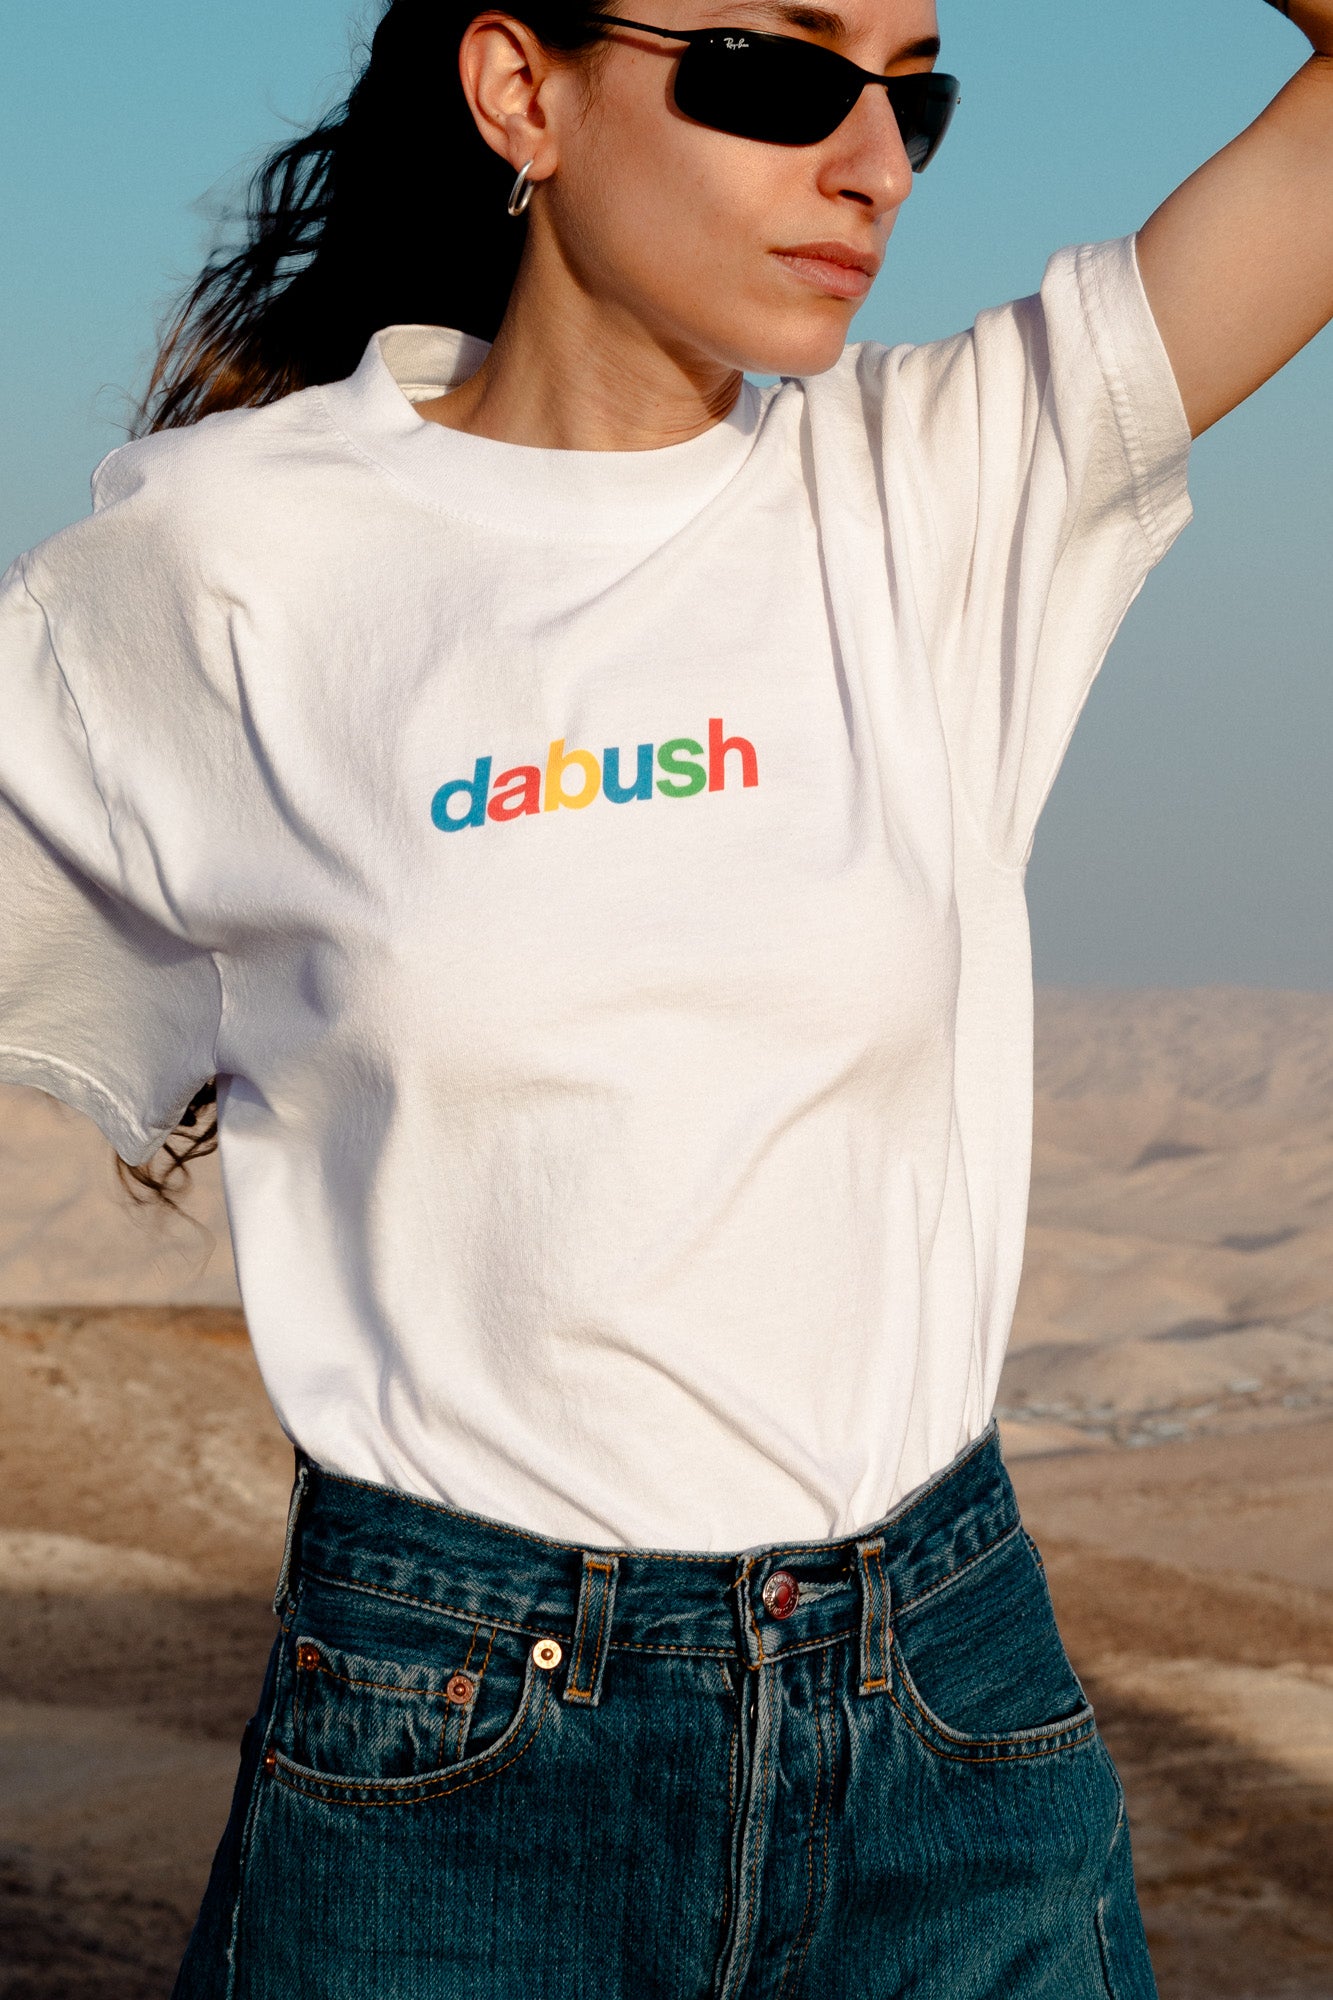 DABUSH T-SHIRT. 100% Cotton, oversized tee with Back and front print. Made in Tel aviv. Shop and view the latest Drops from the official DABUSH website. Worldwide Shipping. DABUSH is a publishing house, design studio and a brand based in Tel Aviv, Israel.